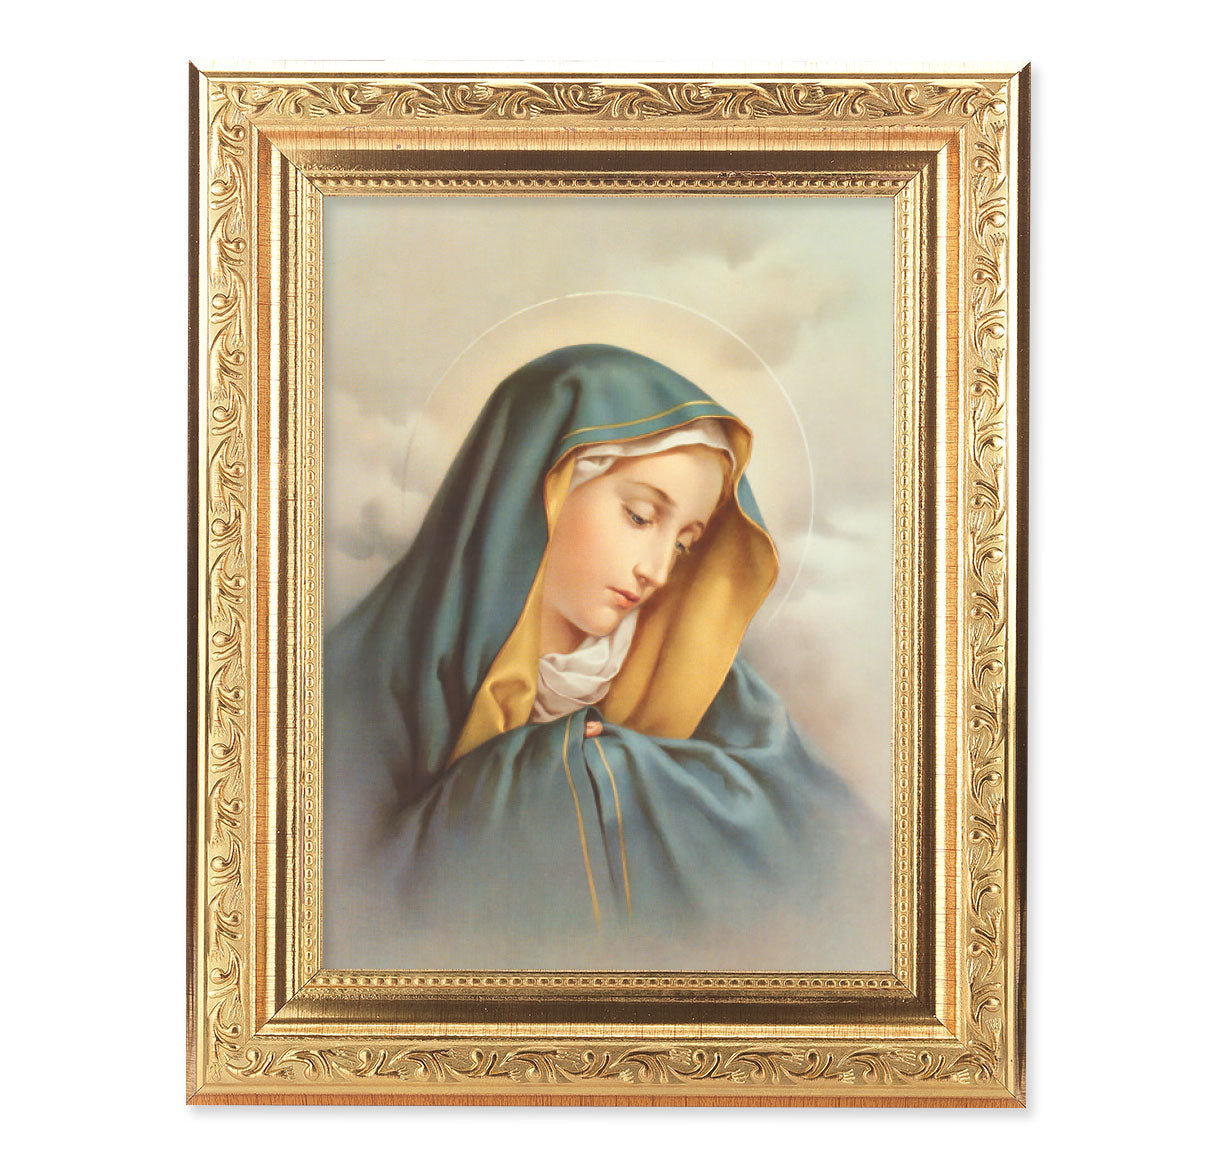 Our Lady of Sorrows Antique Gold Framed Art